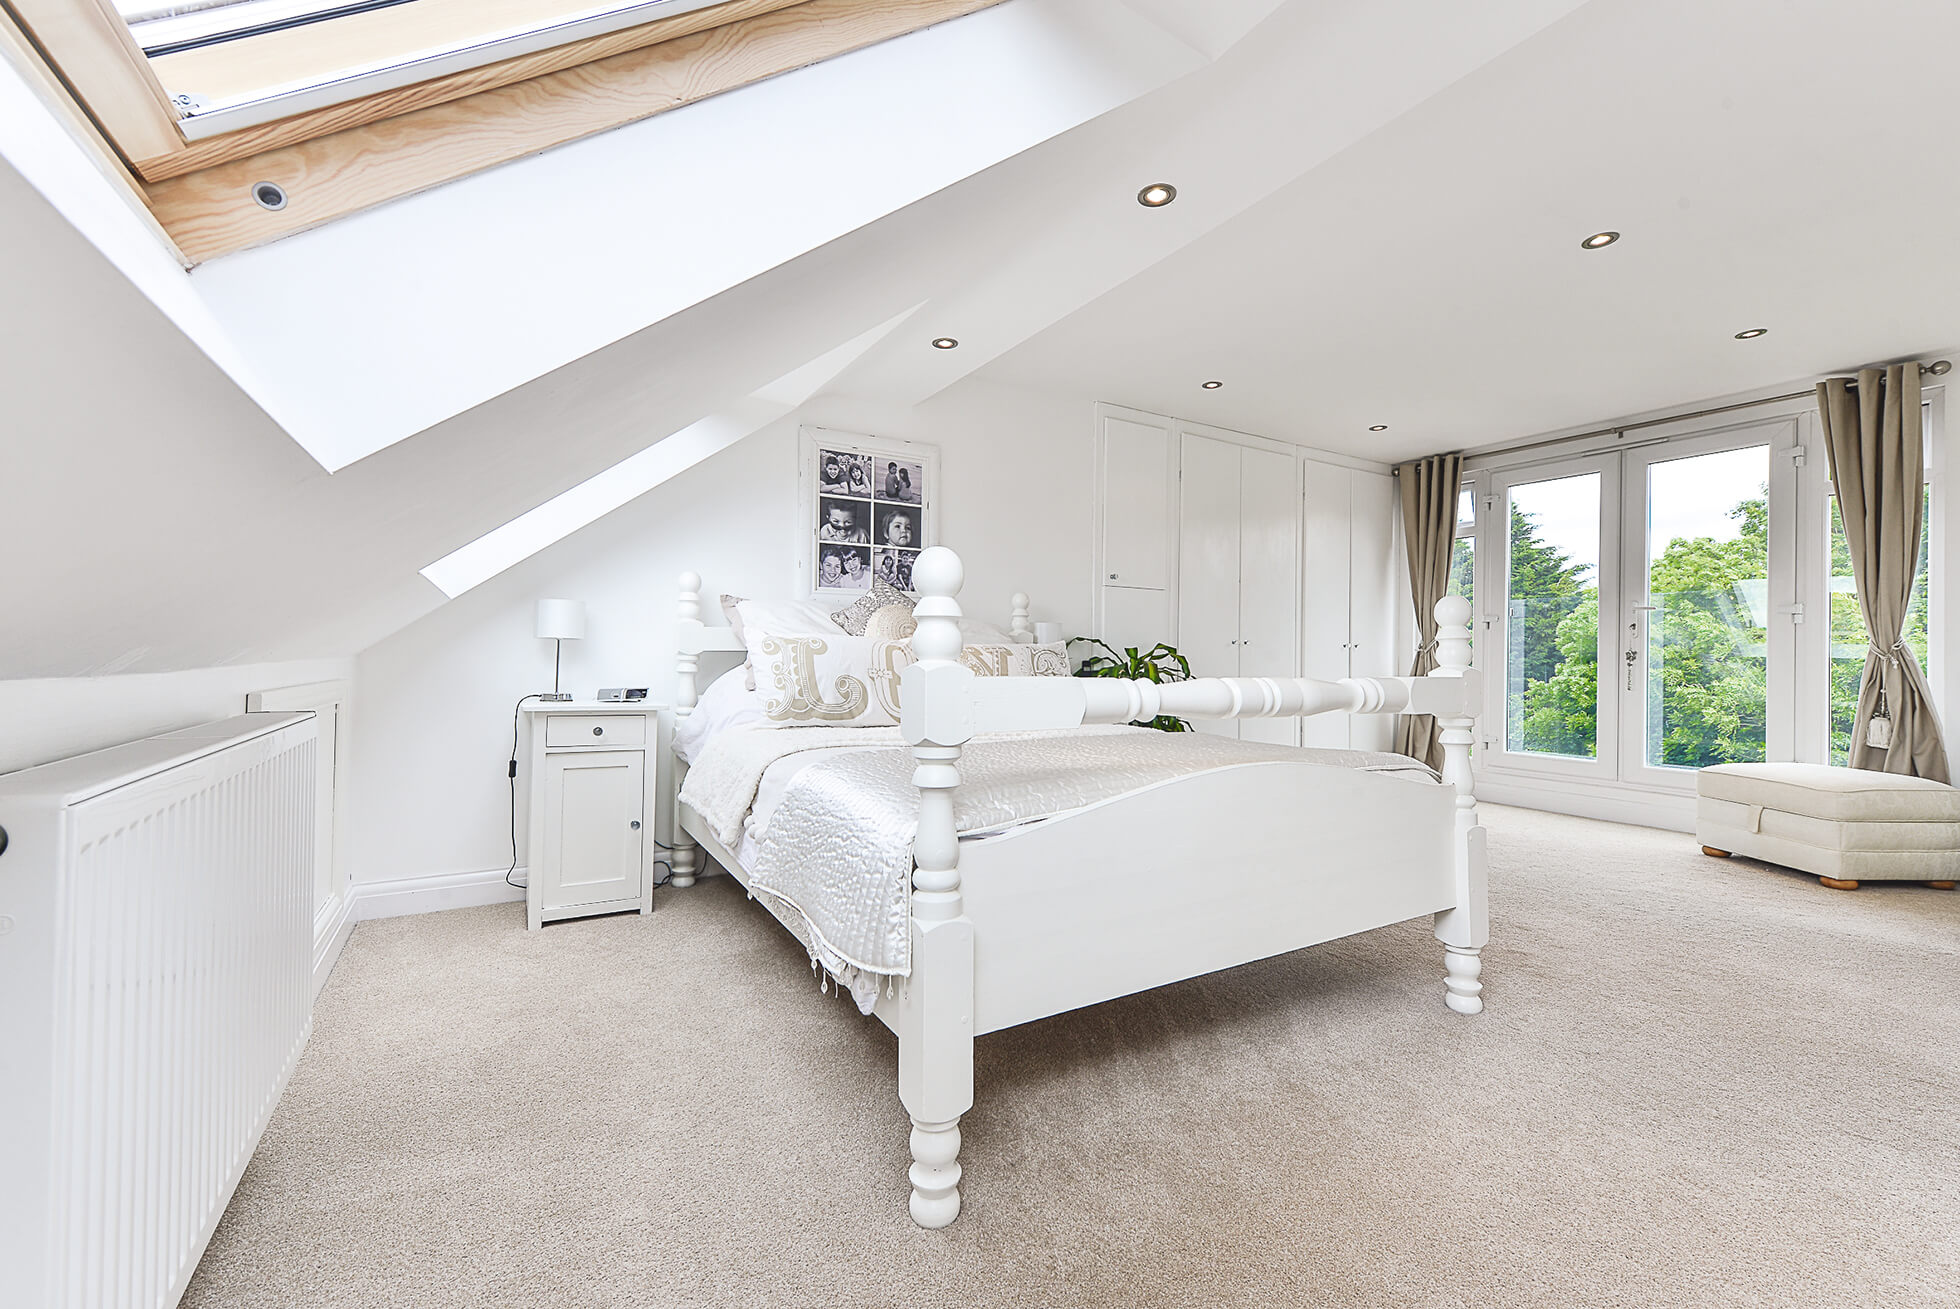 Do you have a question about converting your Loft in Welwyn? Here are the most popular questions asked by our clients.